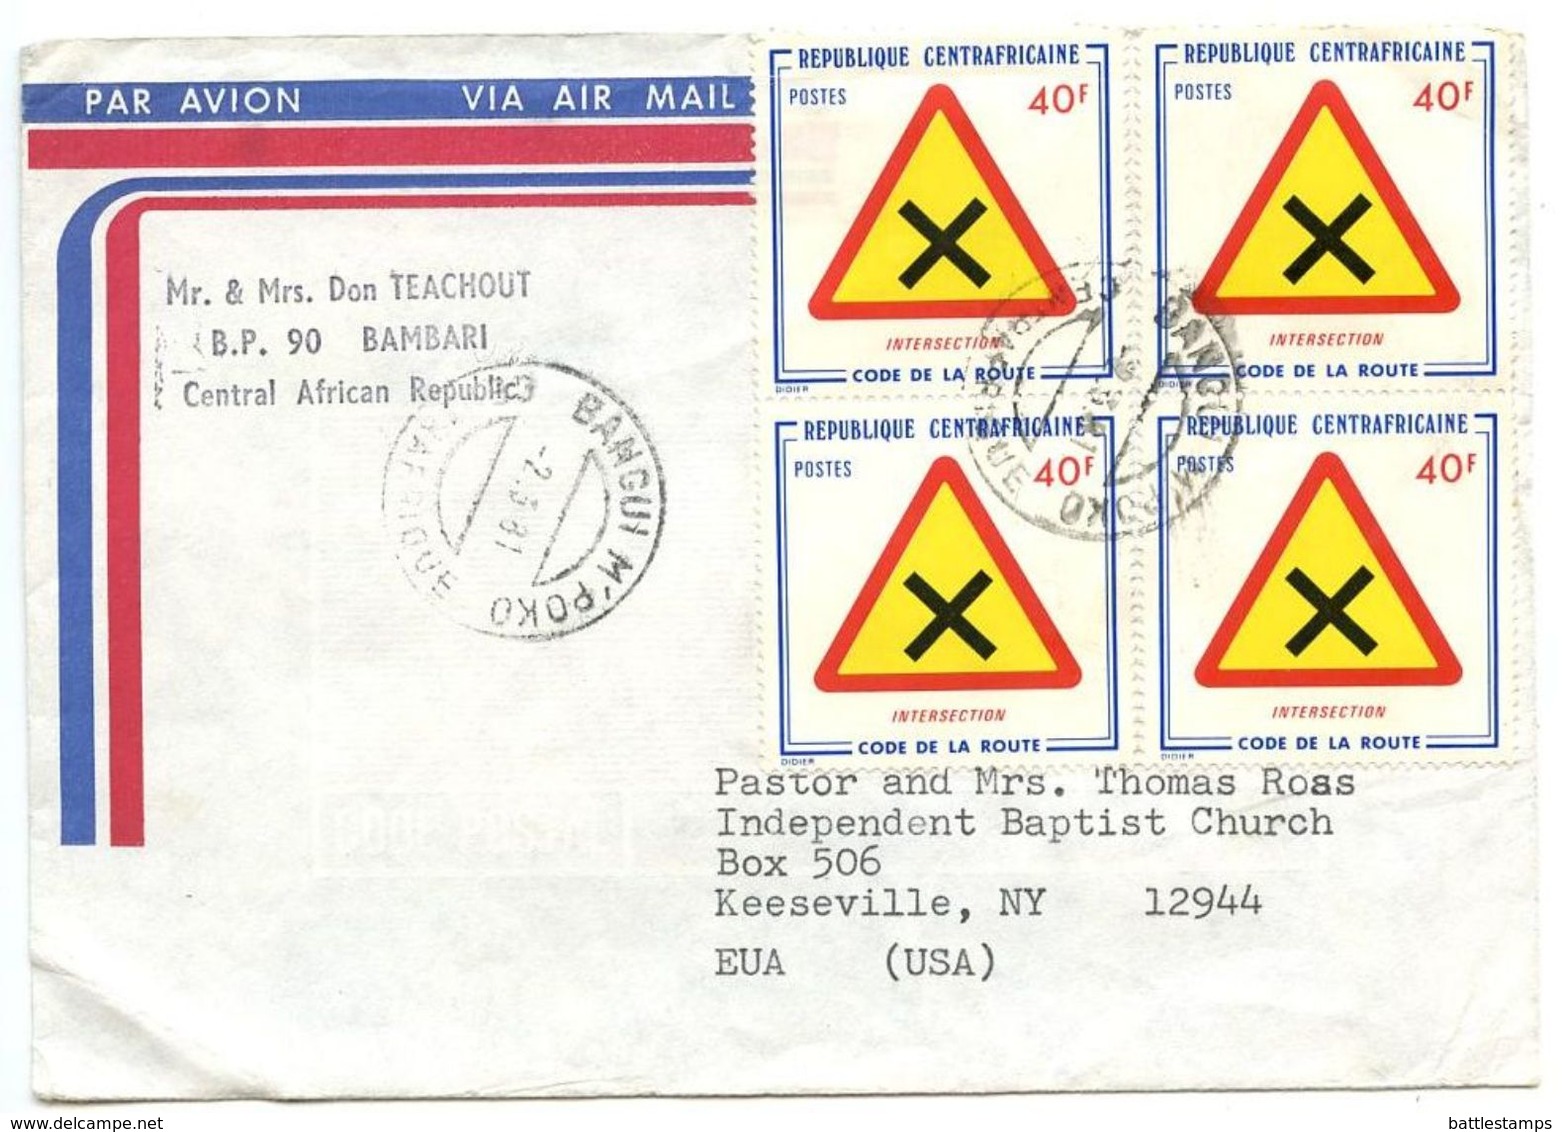 Central Africa 1981 Airmail Cover Bangui M’Poko To Keeeville NY, Scott 233 Traffic Signs - Central African Republic